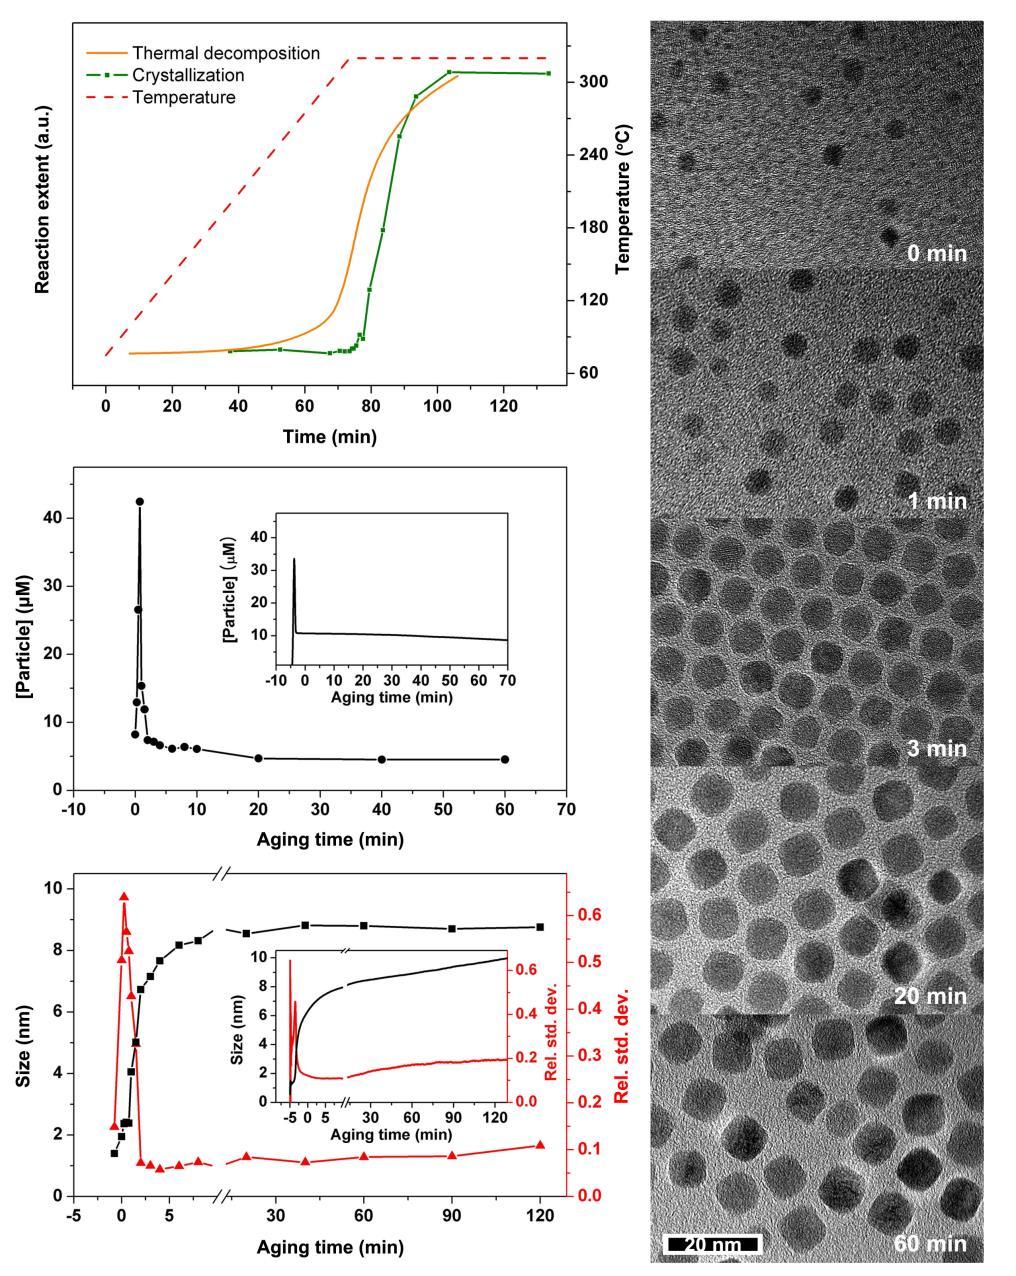 Growth Mechanism of Monodisperse Iron Oxide Nanocrystals by Heating-up Process using